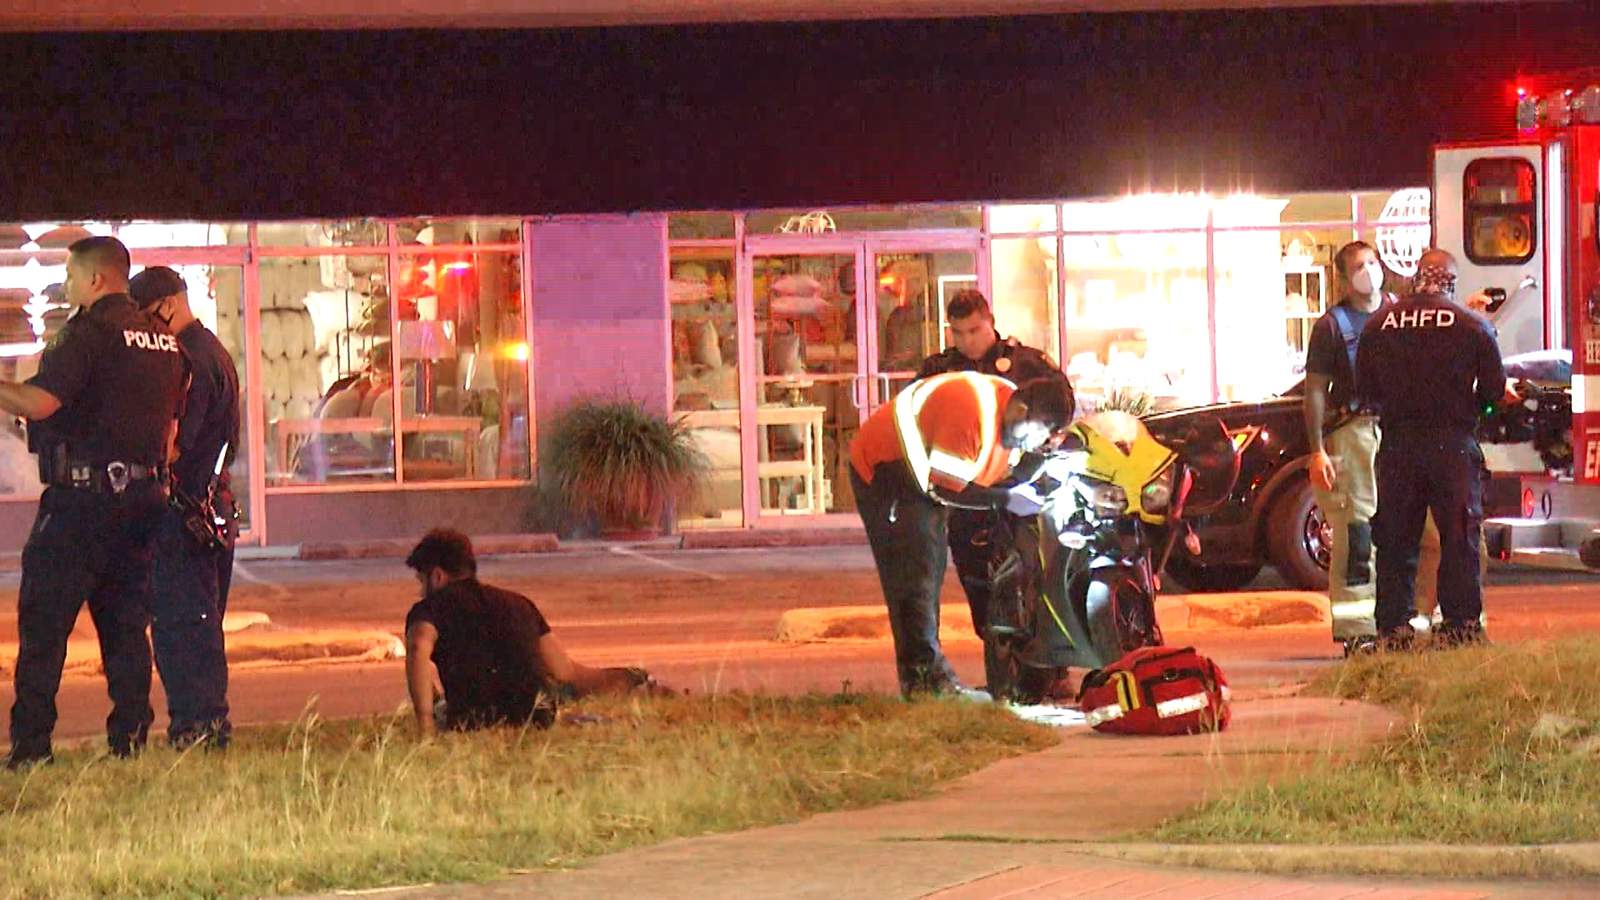 Motorcyclist, SUV both crash at roundabout in Olmos Park, police say